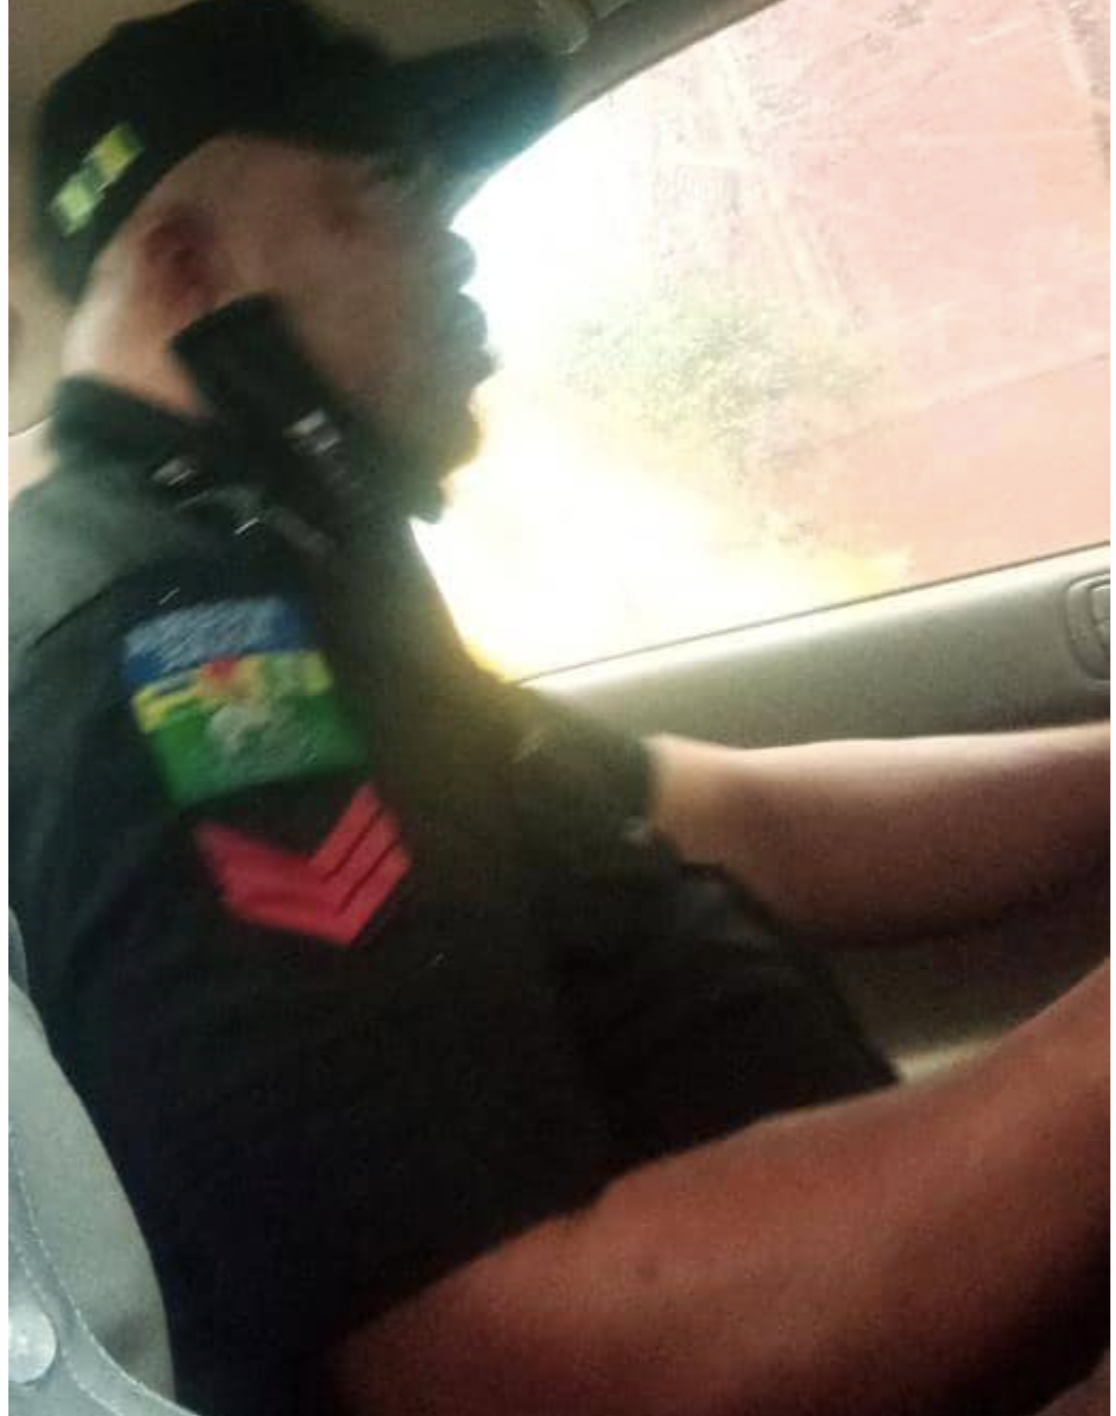 Fake Lagos Policemen Extorted N27,000 From a Motorist. Here's the Face of One of Them